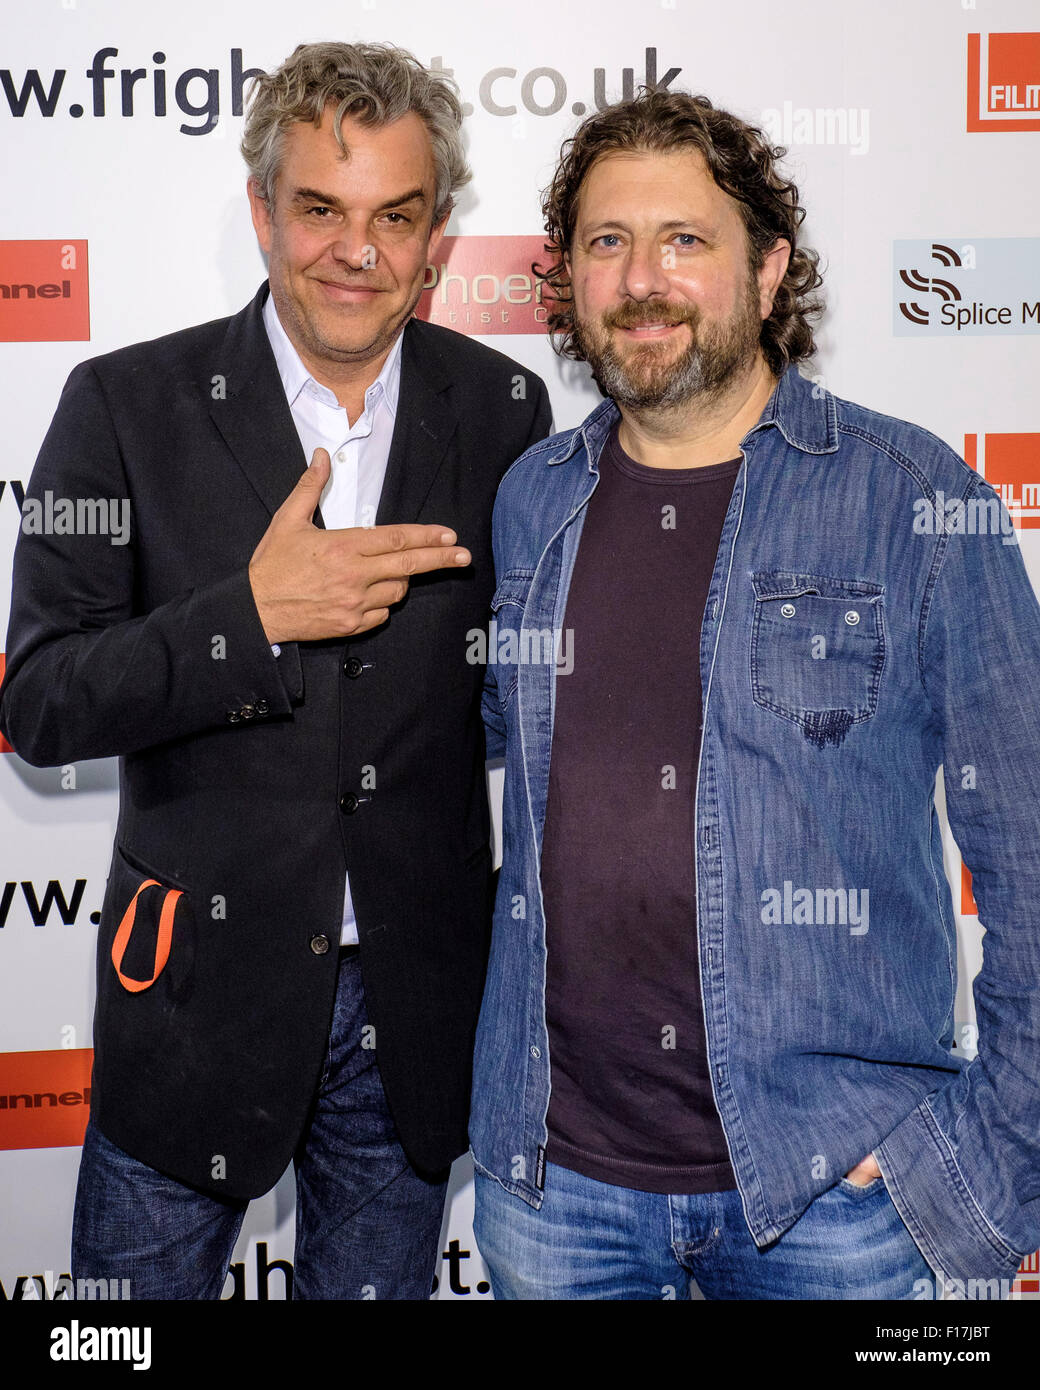 Director Bernard Rose and Danny Huston attends the Frightfest 2015 on 29/08/2015 at The VUE West End, London. The UK Premiere of Frankenstein. Picture by Julie Edwards/Alamy Live News Stock Photo